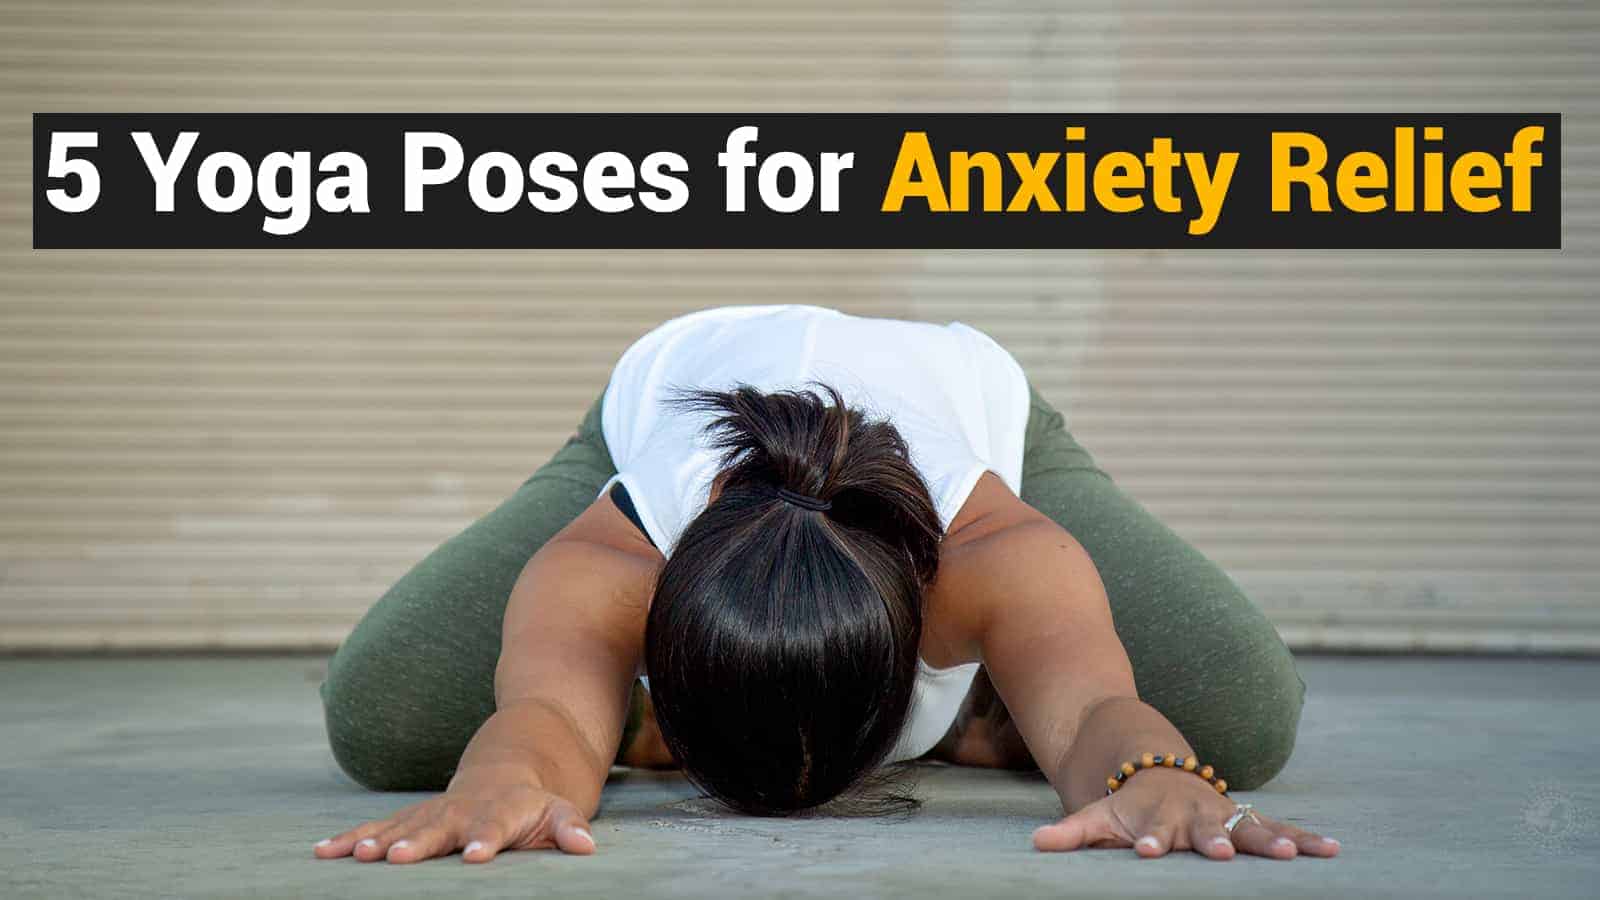 5 Yoga Poses for Anxiety Relief | Power of Positivity